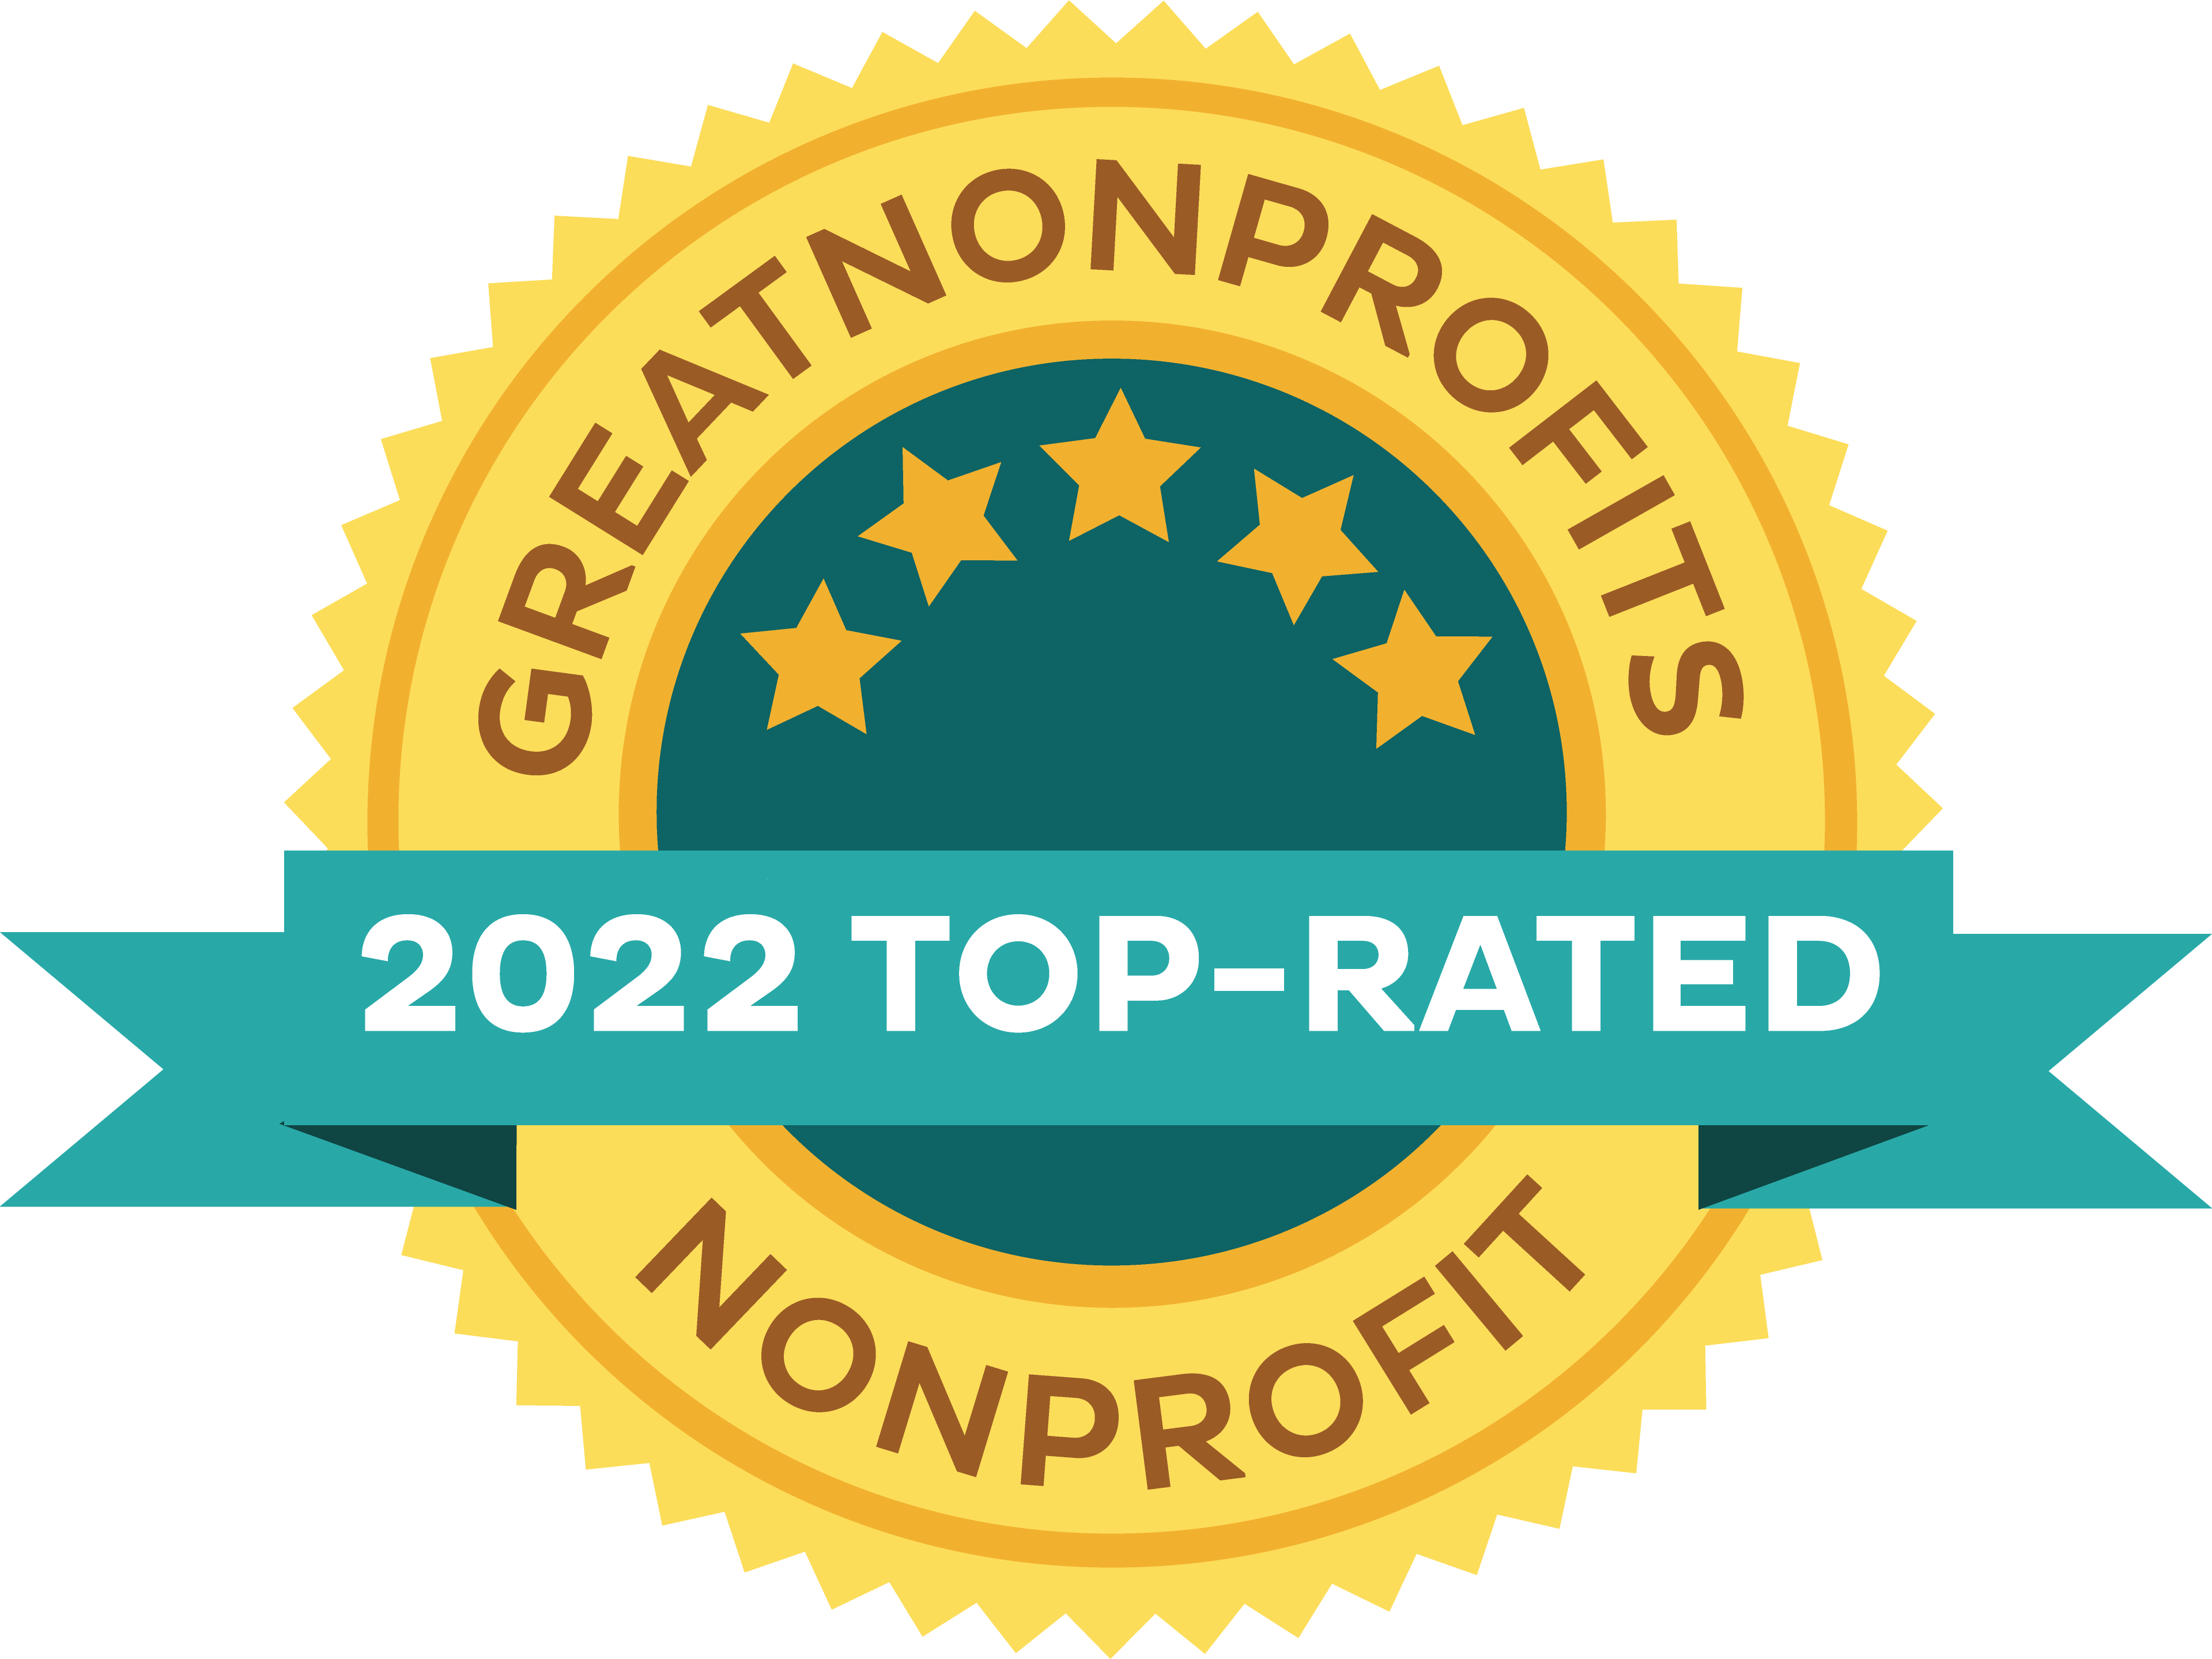 Assistance League Of Boise Idaho Inc Nonprofit Overview and Reviews on GreatNonprofits